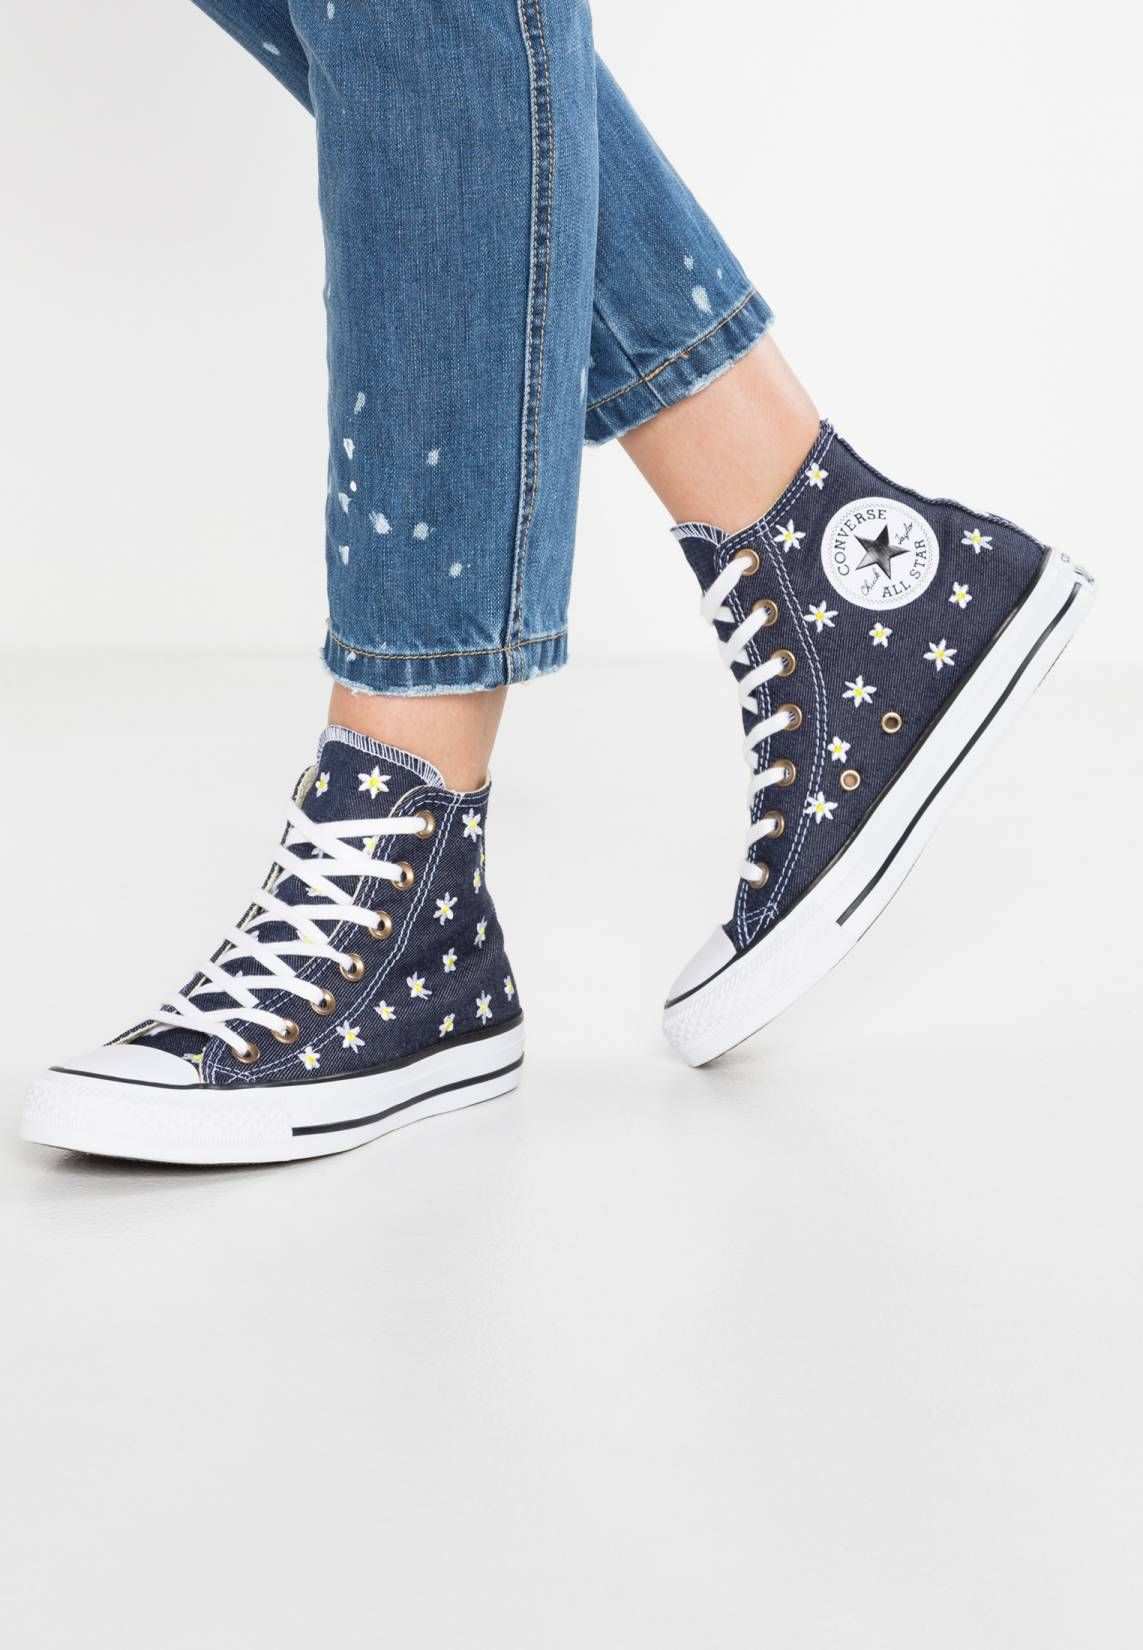 Converse Chuck Taylor All Star Sneaker High Navy Fresh Yellow White Sohle Kunststoff Decksohle Textil Innenmaterial Chuck Taylors Sneaker Sneaker High